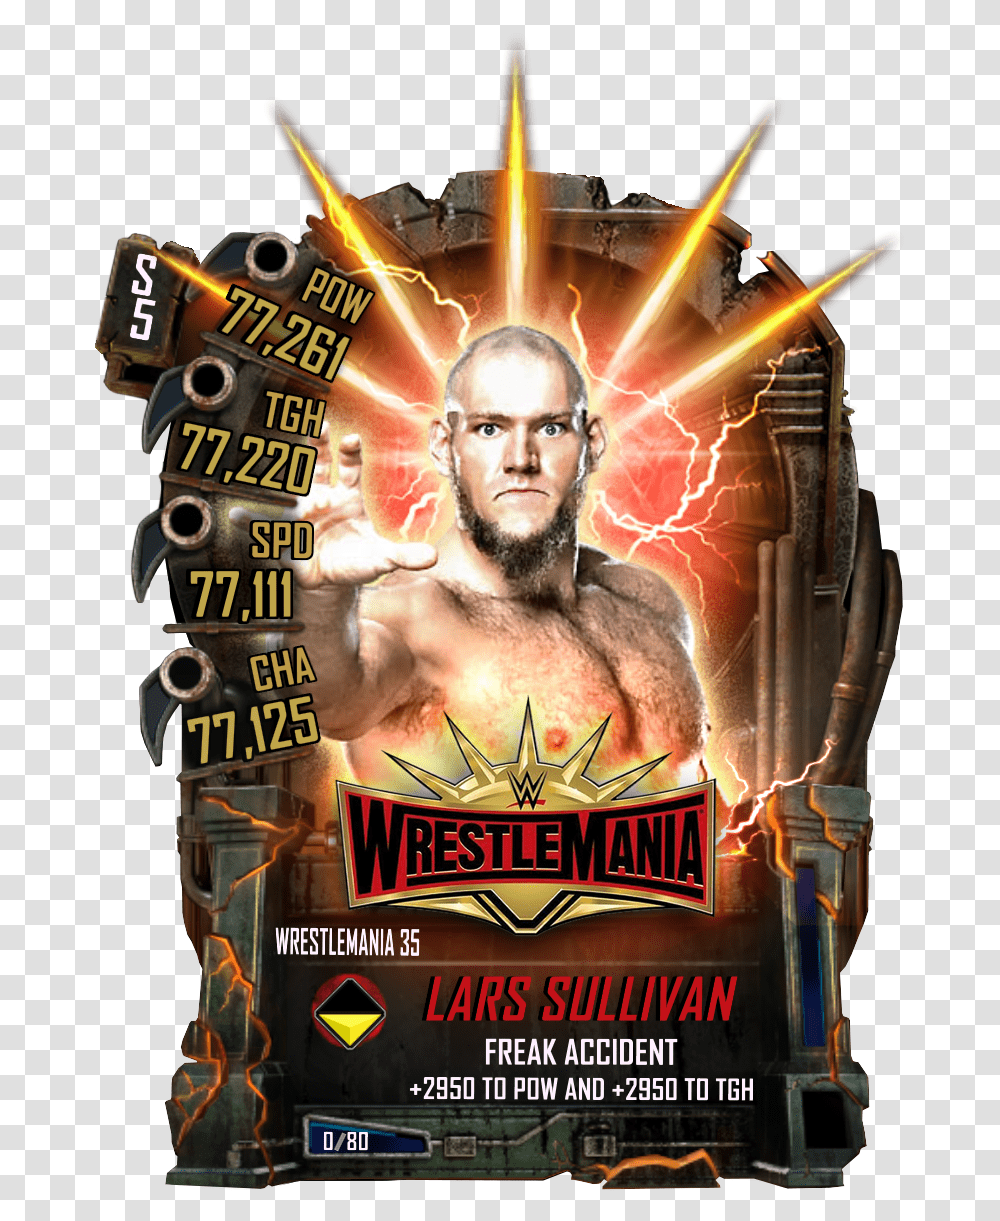 Wwe Supercard Wrestlemania 35 Cards Wrestlemania 35 Wwe Supercard, Poster, Advertisement, Flyer, Paper Transparent Png